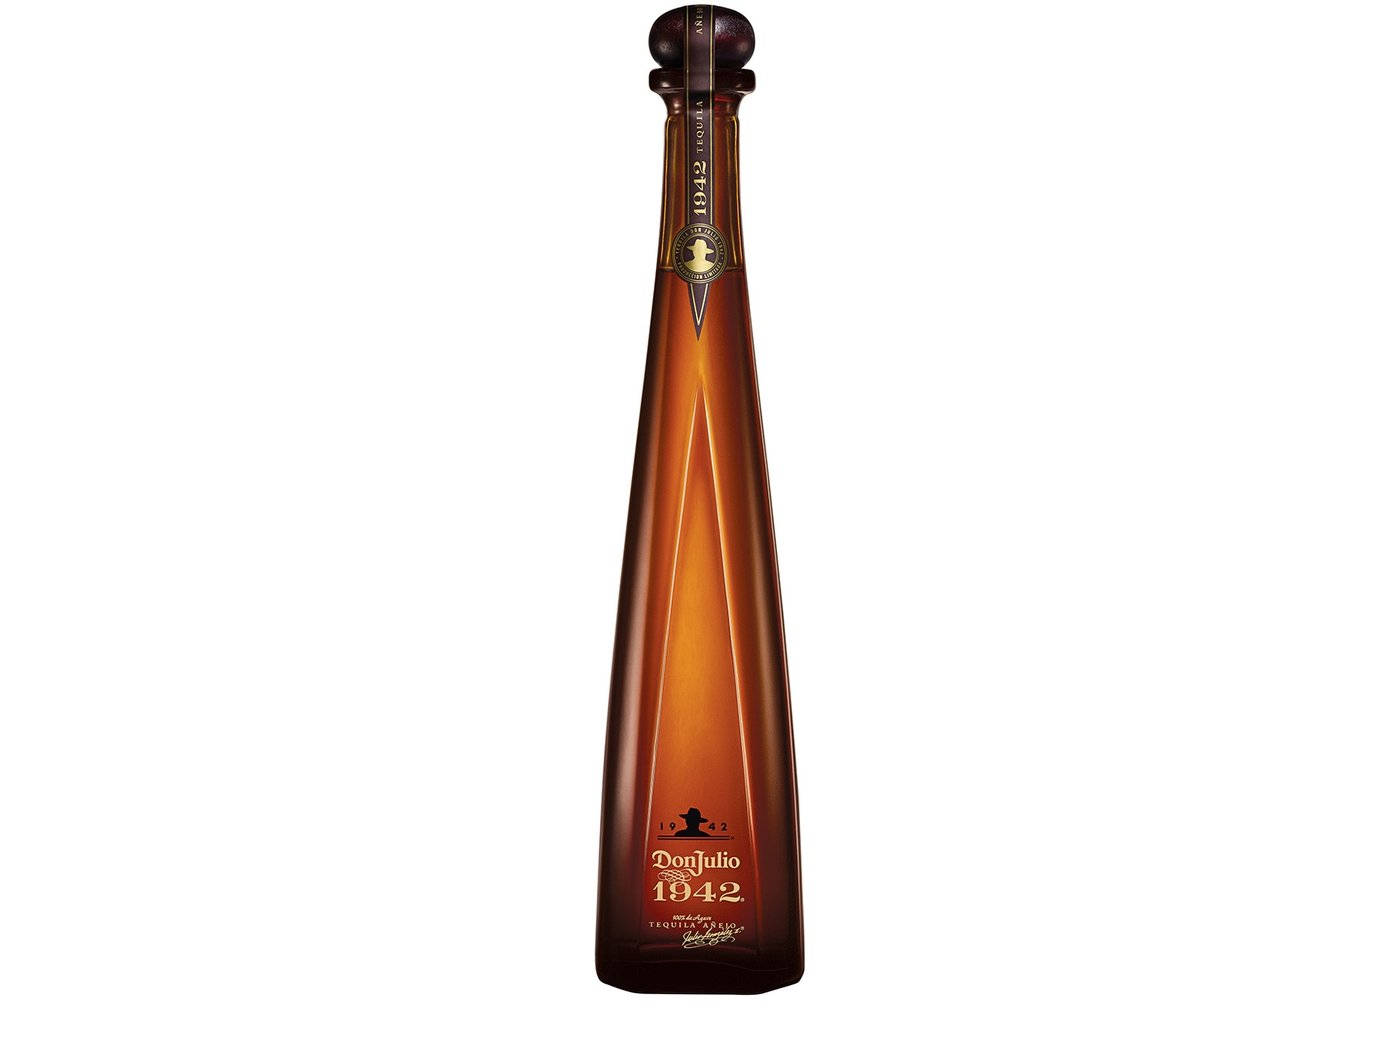 Donjulio Tequila 1942 (in German): 